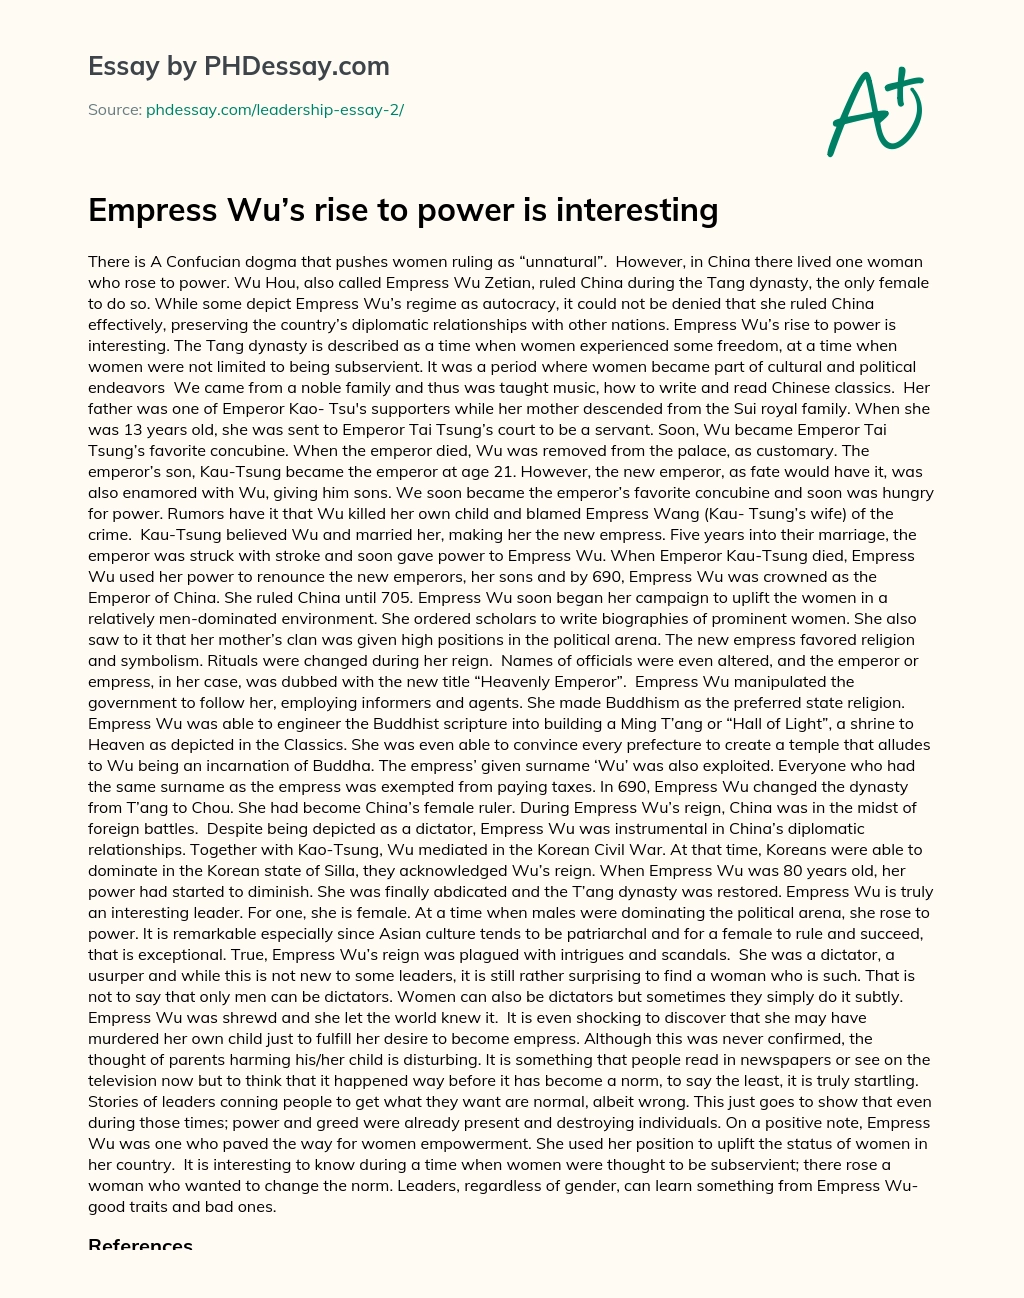 Empress Wu’s rise to power is interesting essay